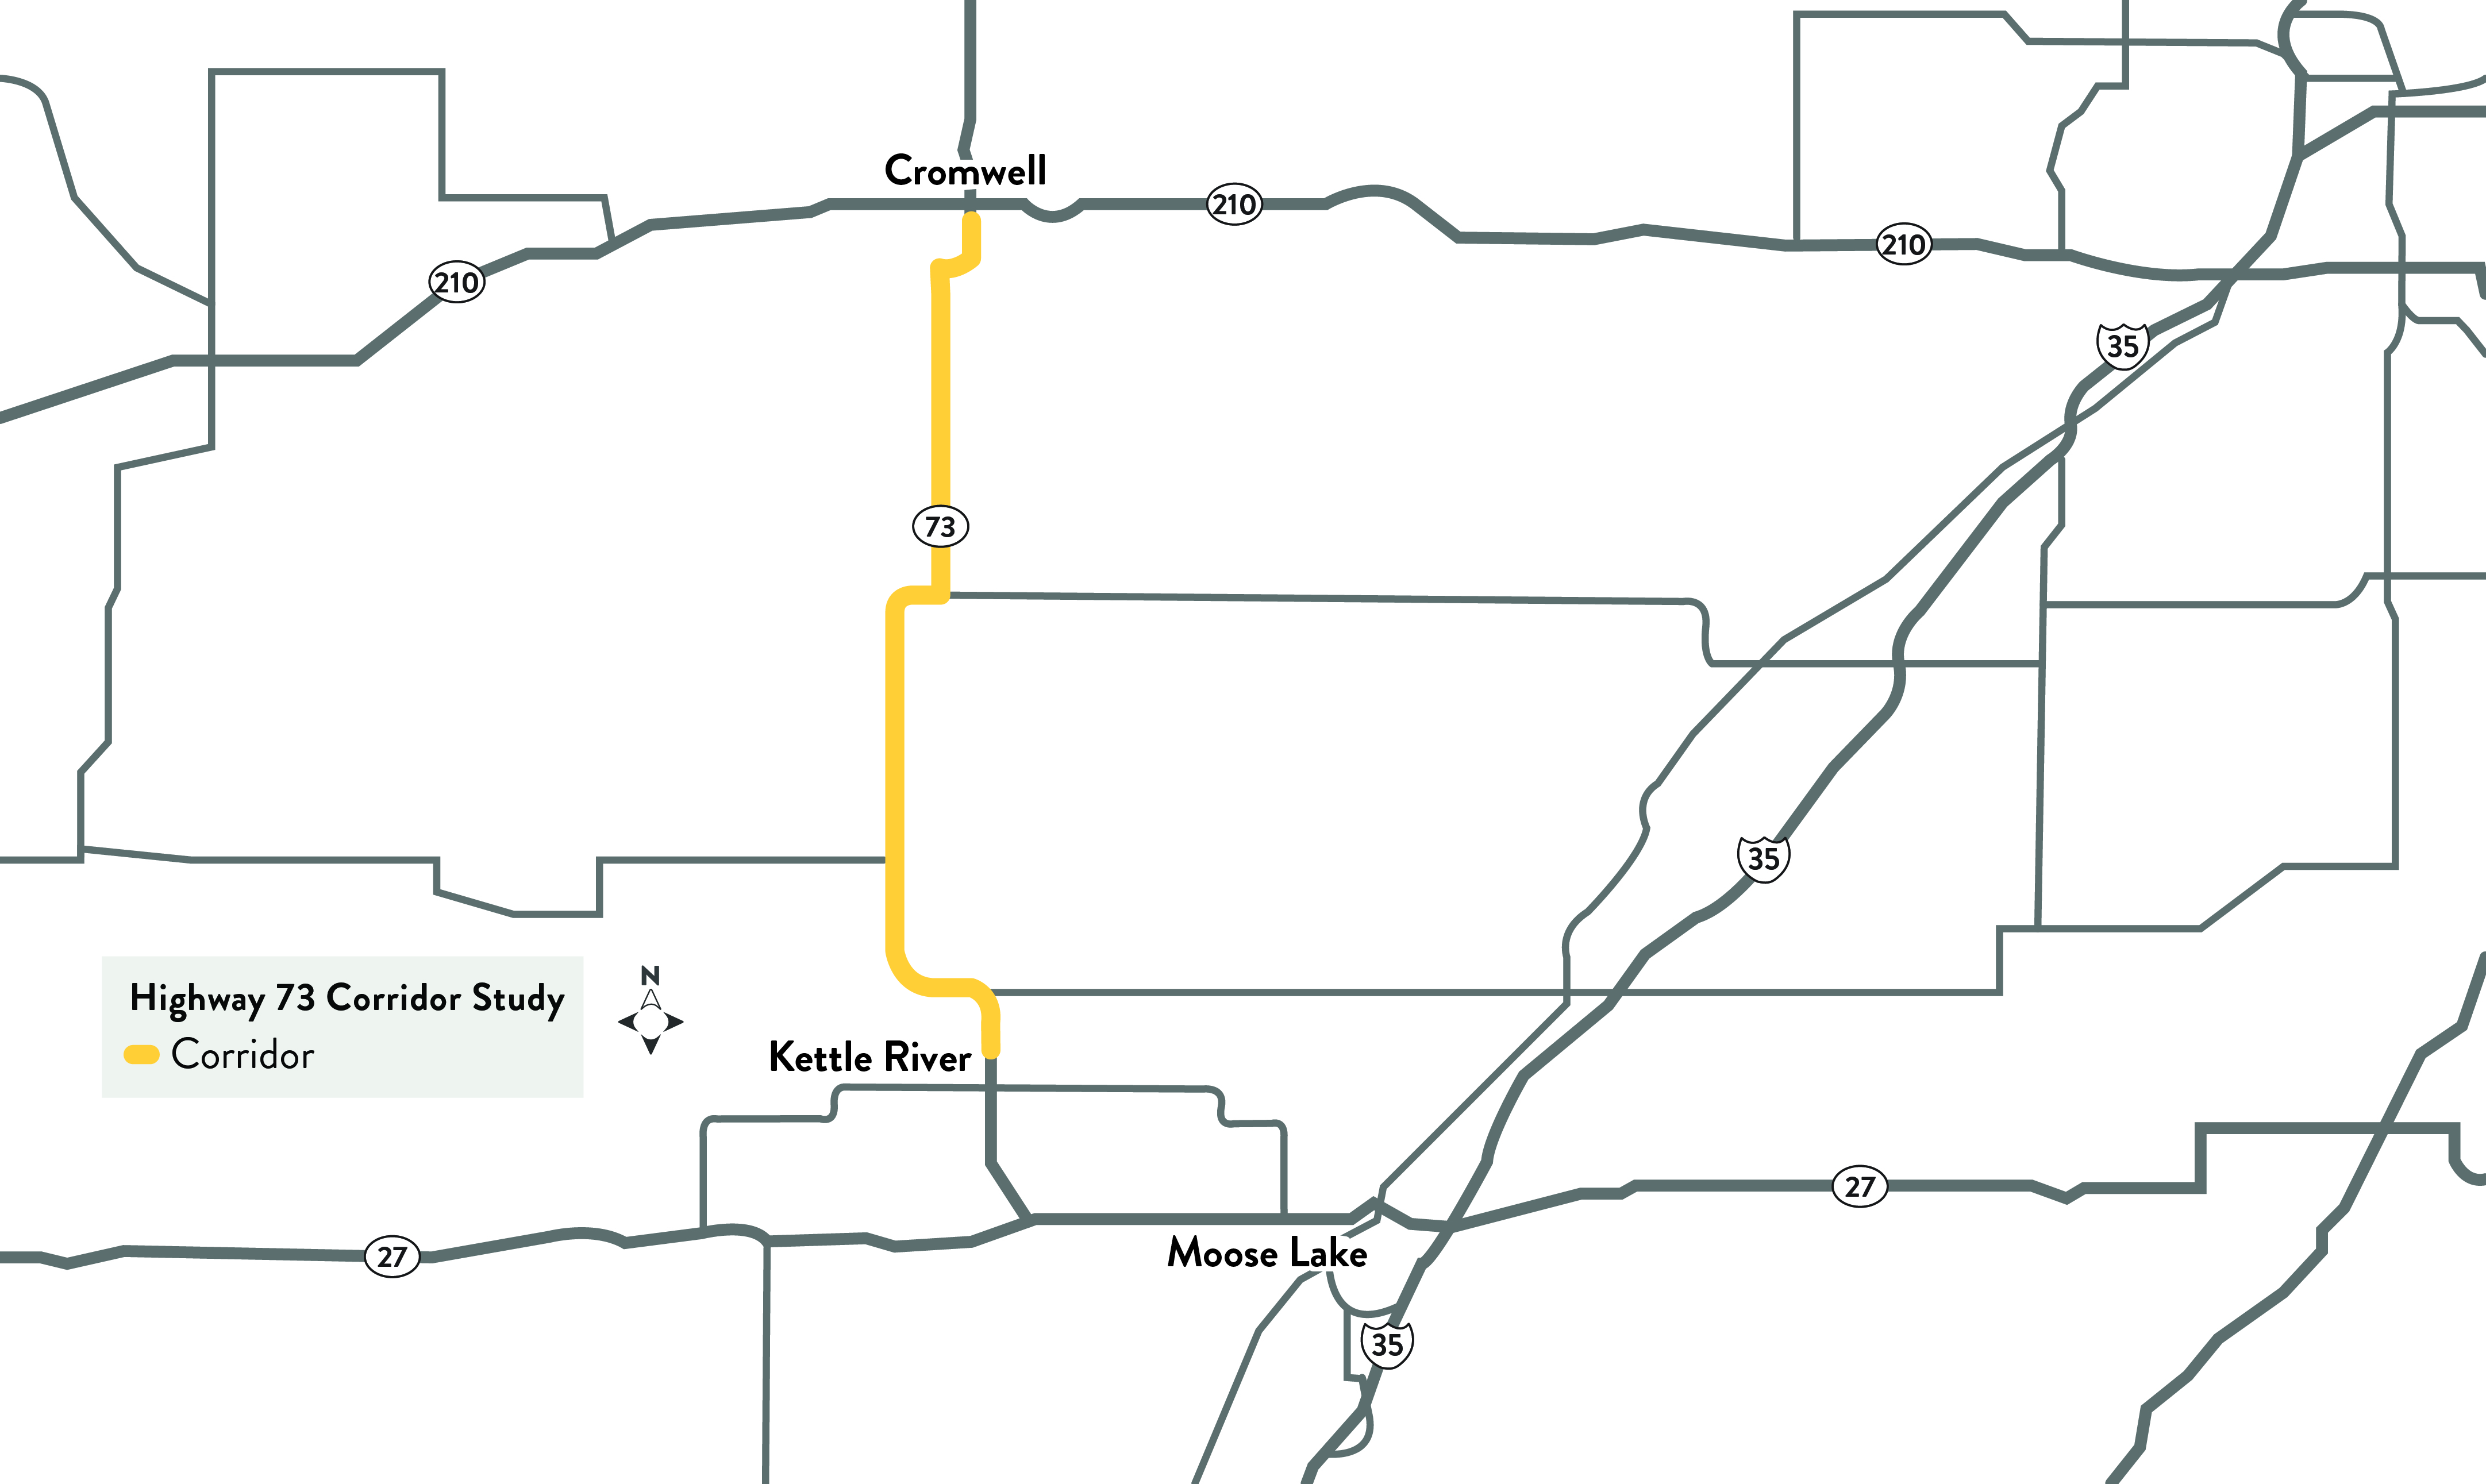 A rendering of the Hwy 73 corridor study from Kettle River to Cromwell.